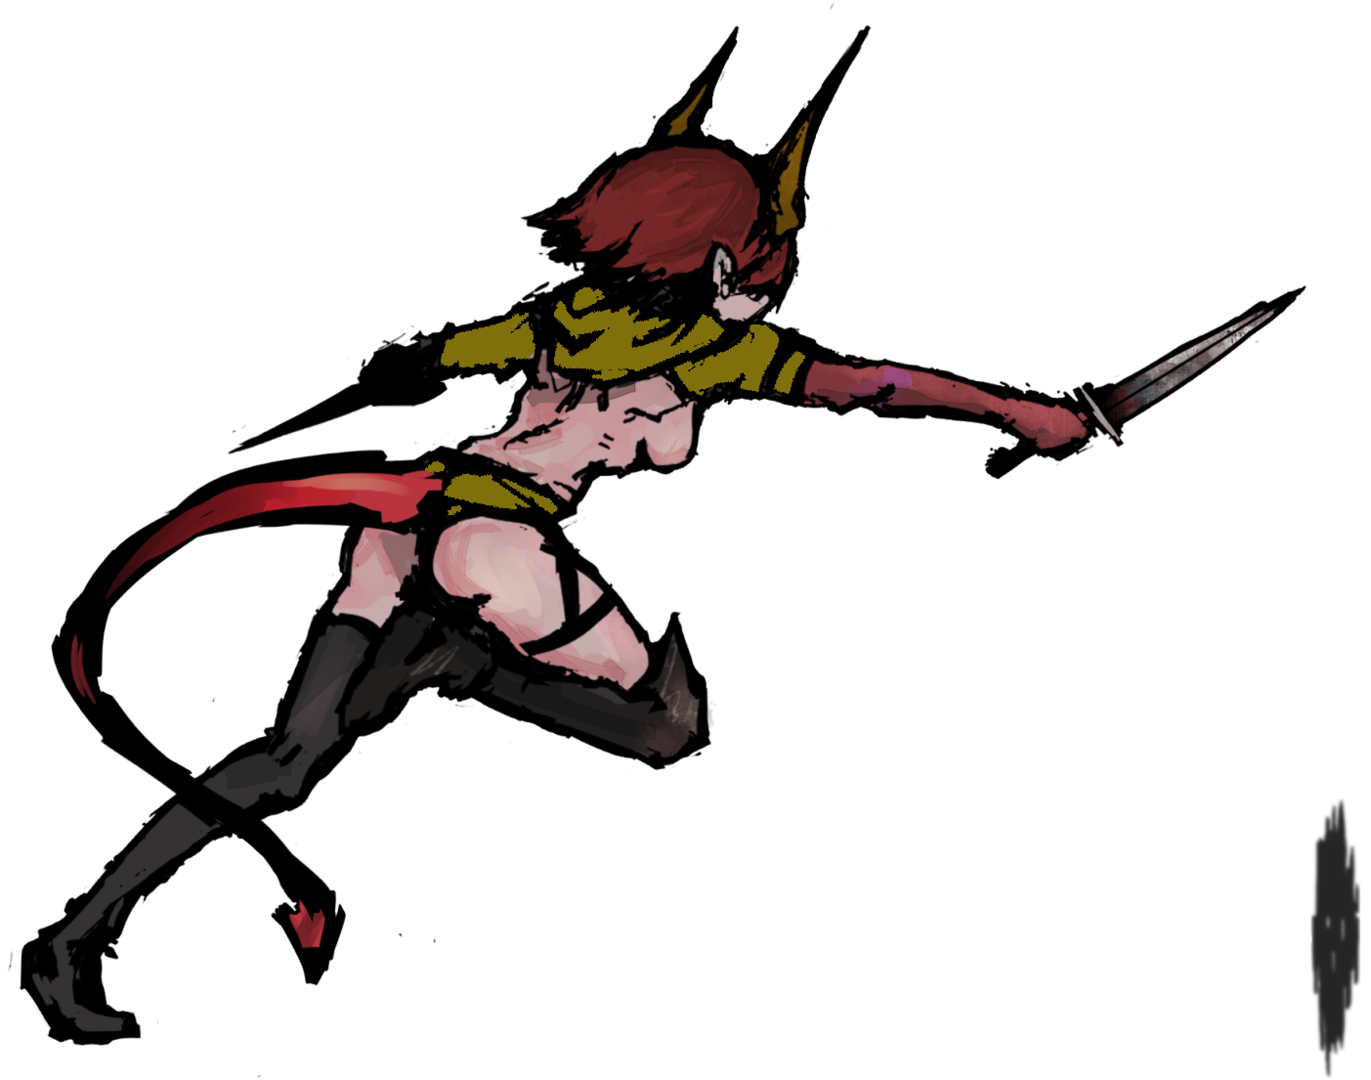 brigand_adv_cutthroat.sprite.attack_lunge.thumb.png.ece96ea93b901a77ef98962dd759dce6.png